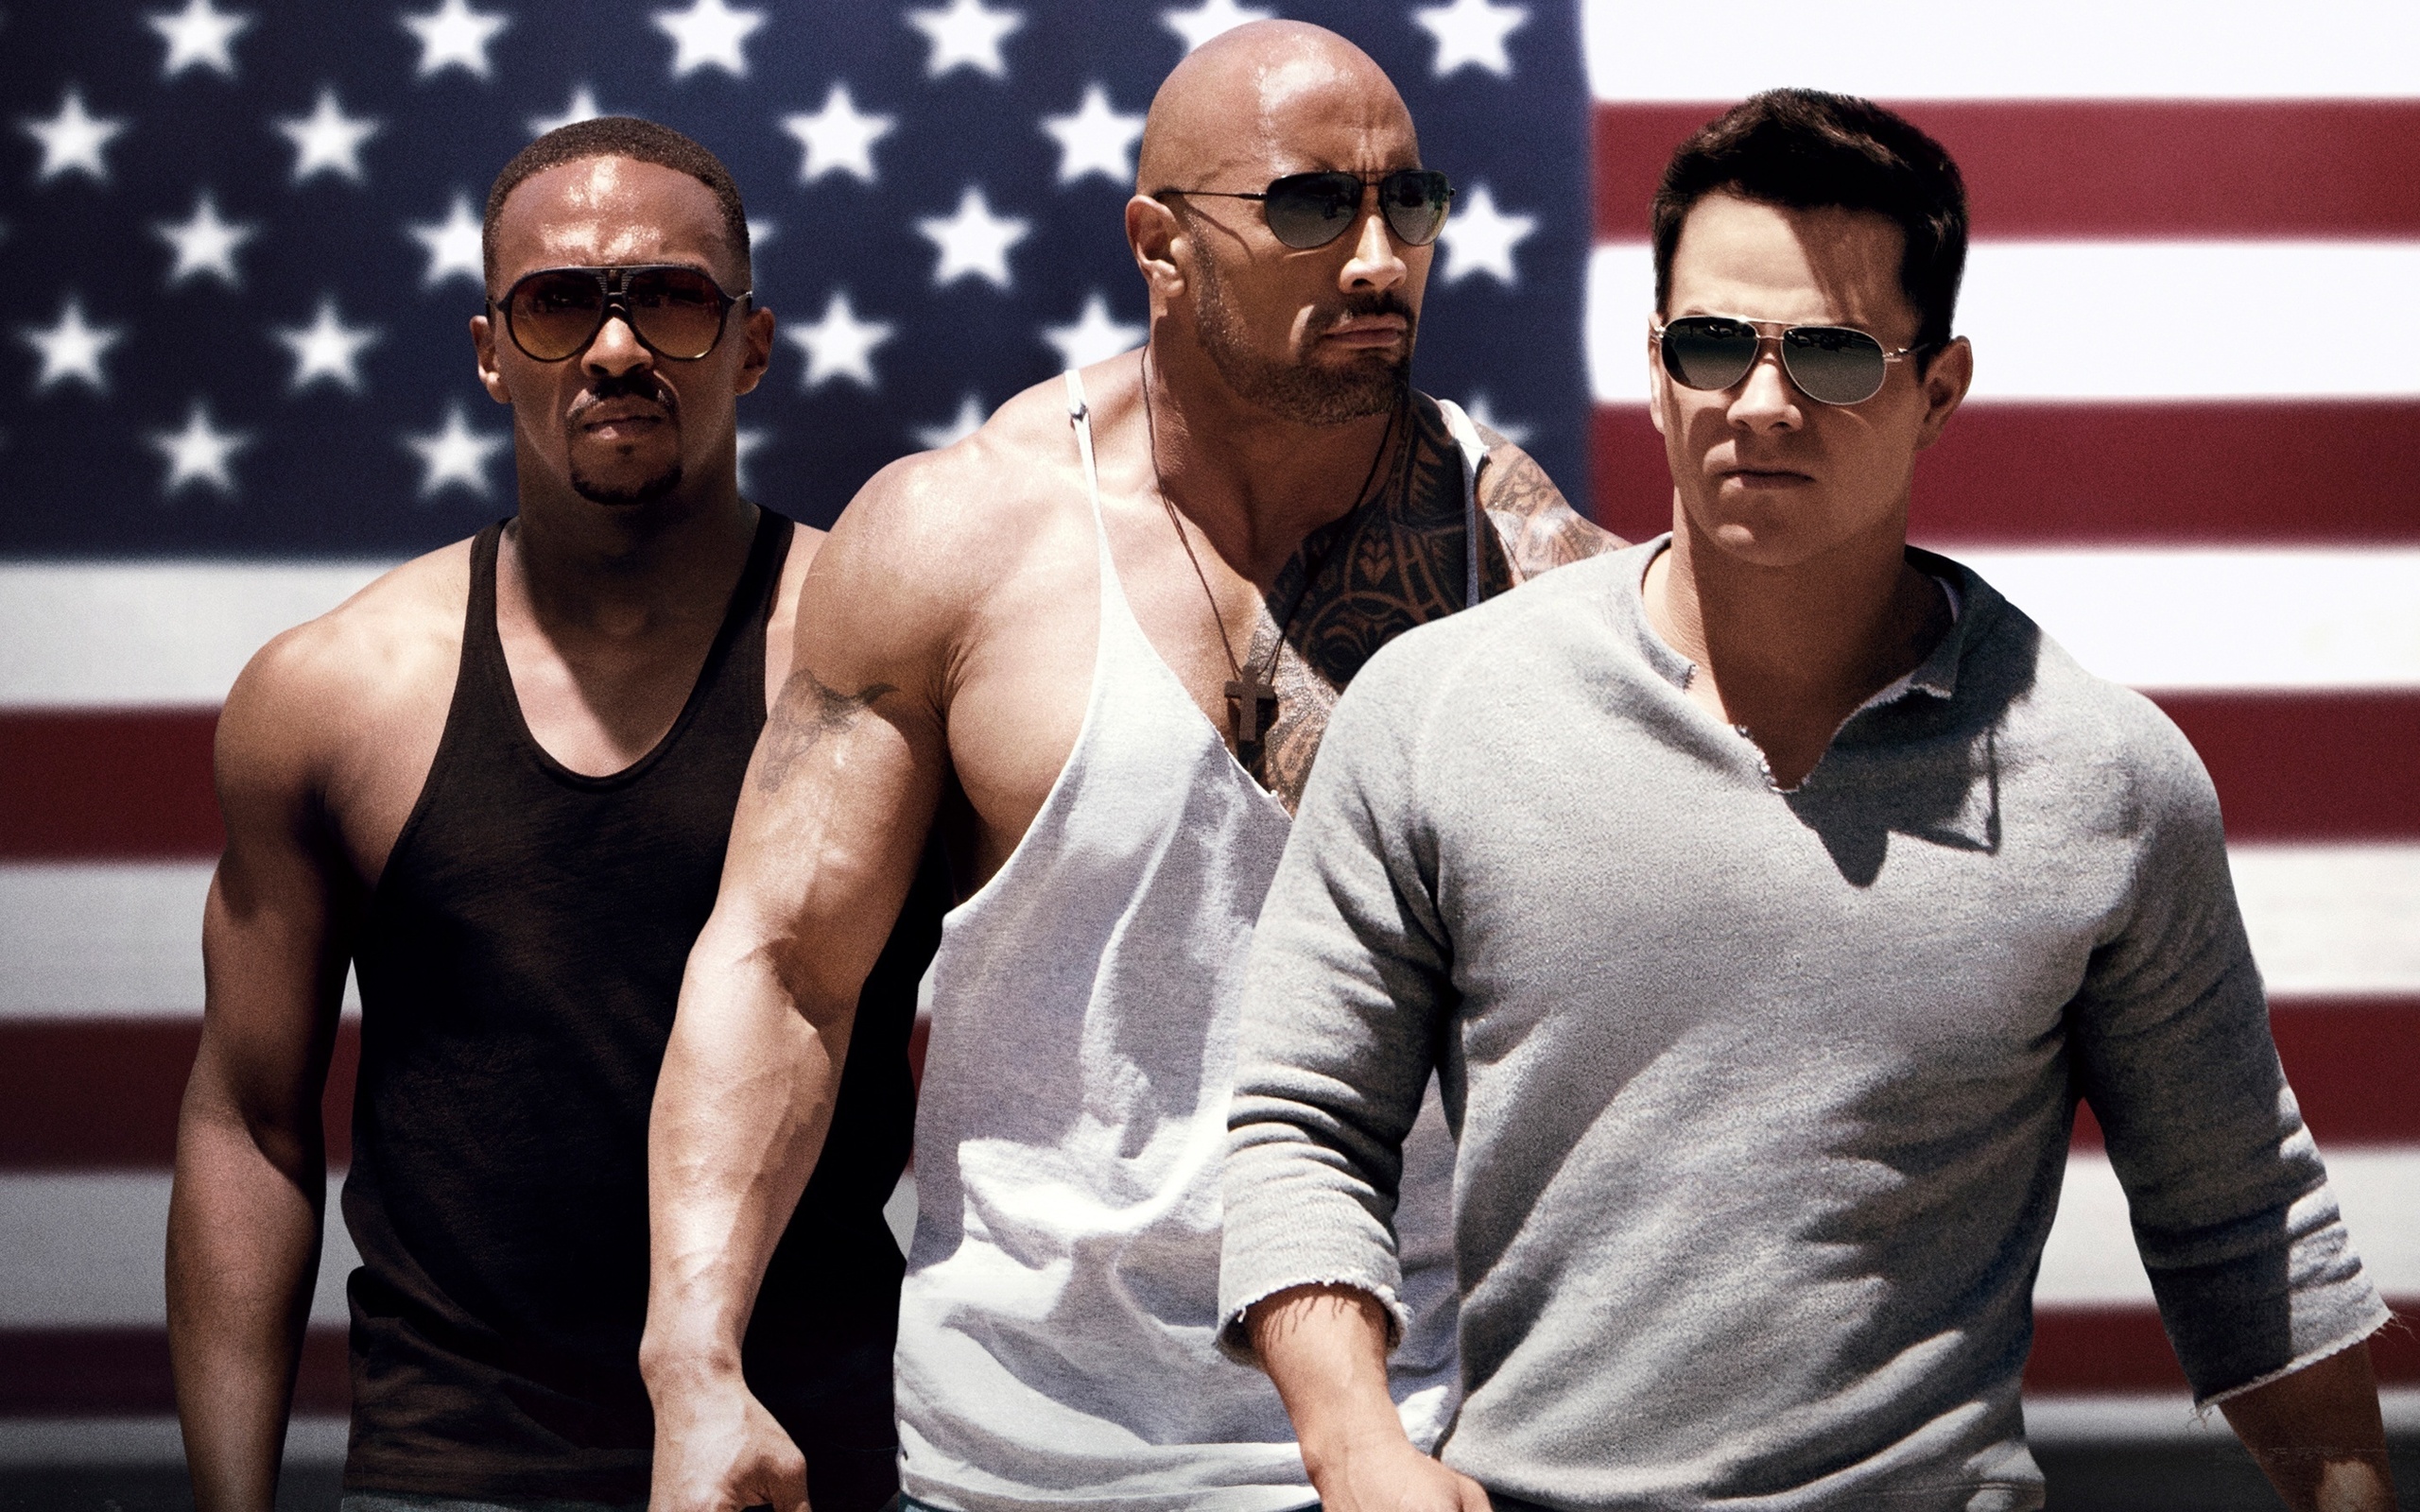 Movie Pain & Gain HD Wallpaper | Background Image